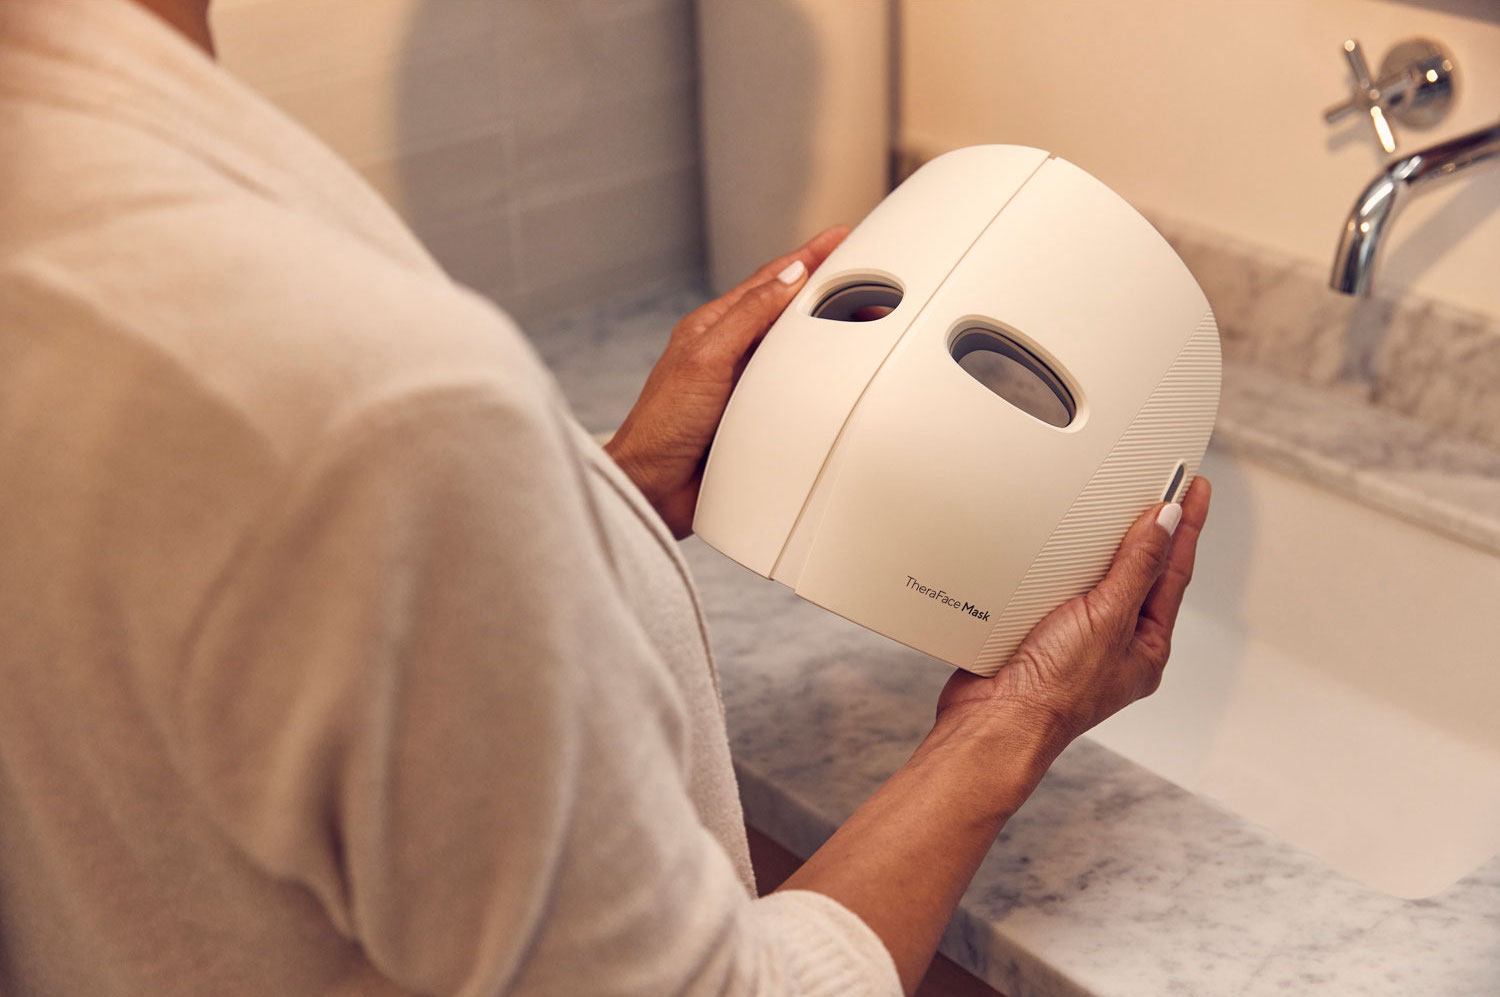 light therapy face mask overview